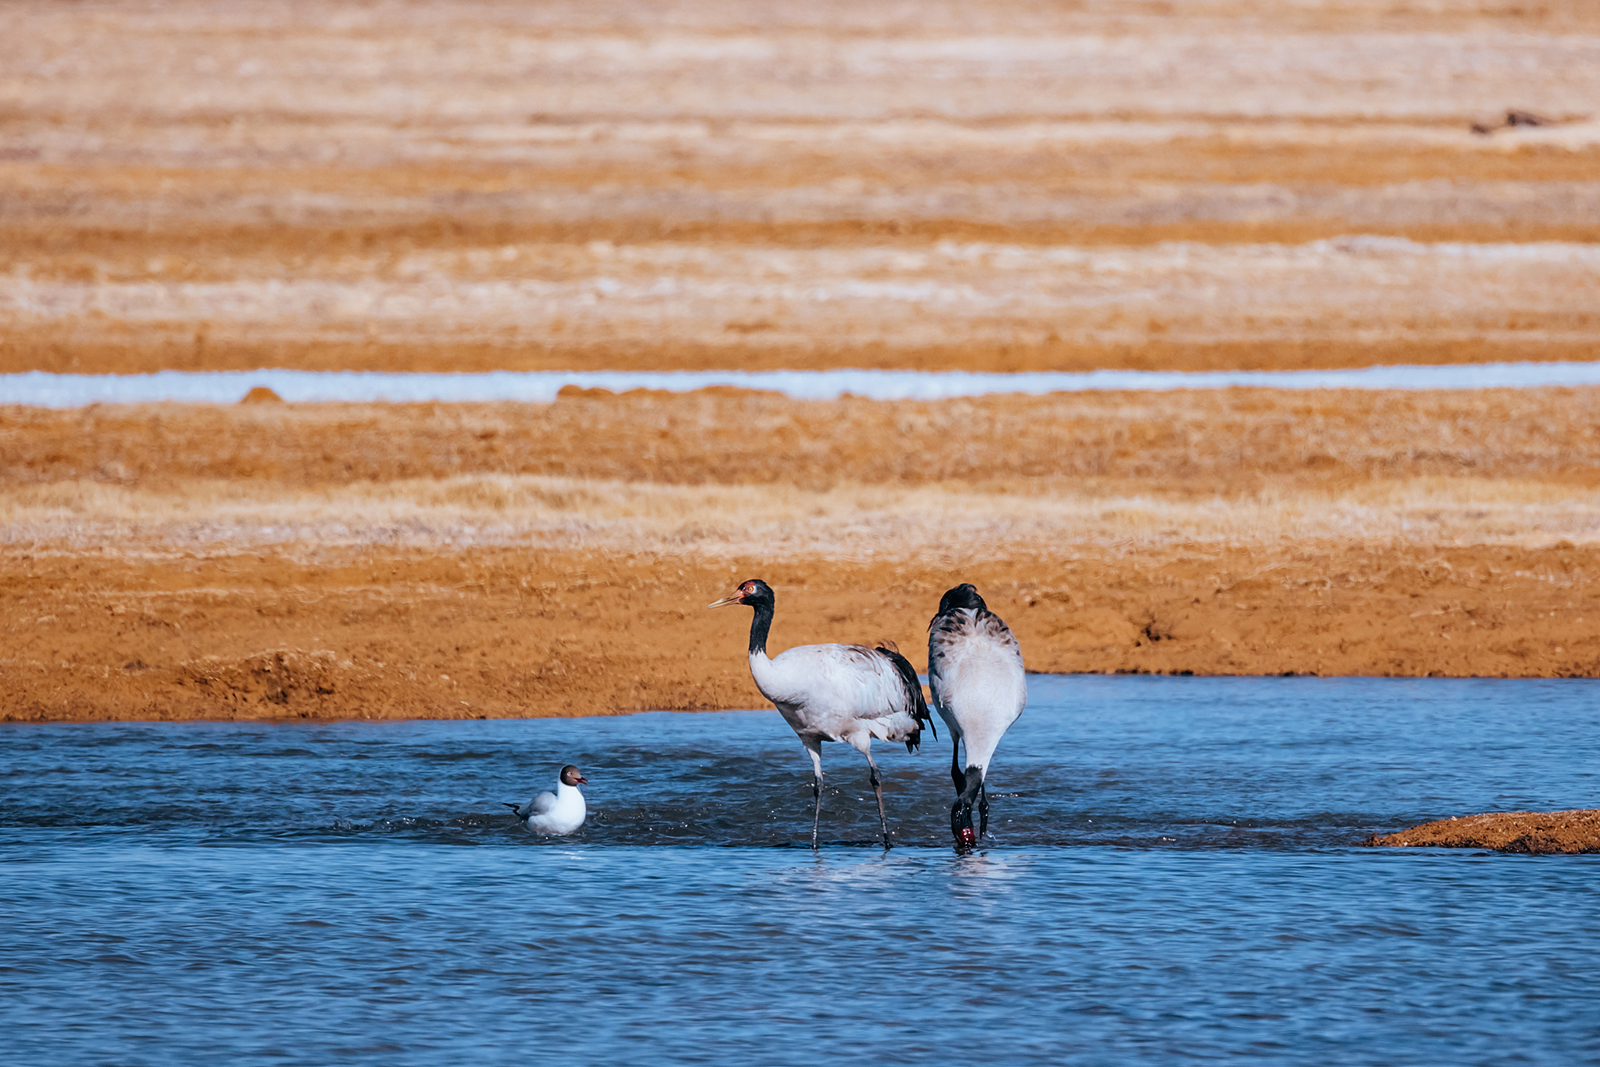 Black-necked cranes are seen at the Sanjiangyuan National Park in Qinghai. /CFP